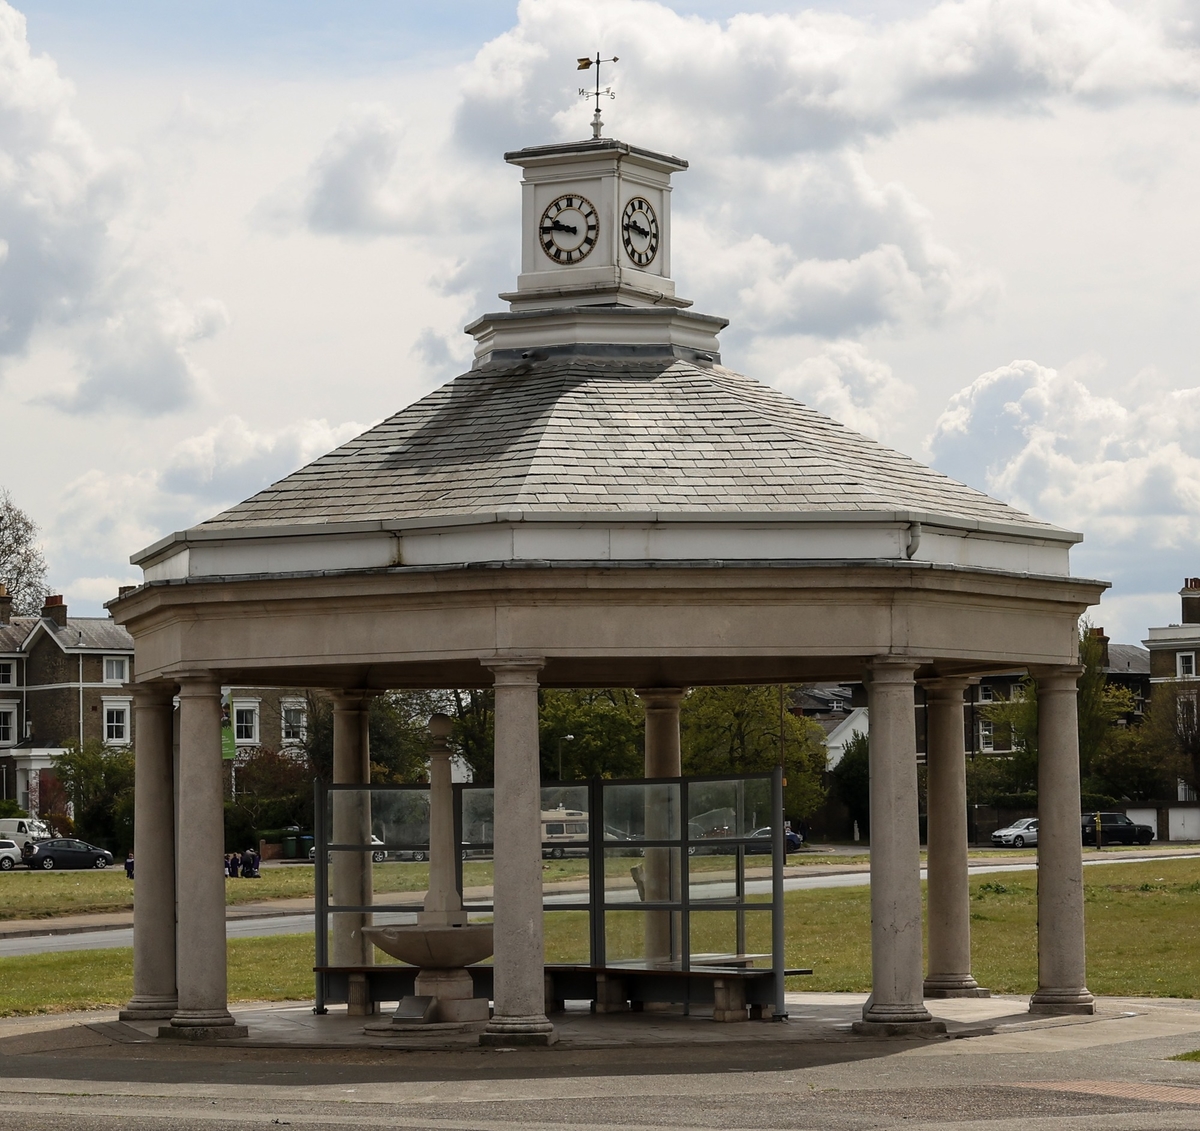 Andrew Gibb Memorial Drinking Fountain and Shelter